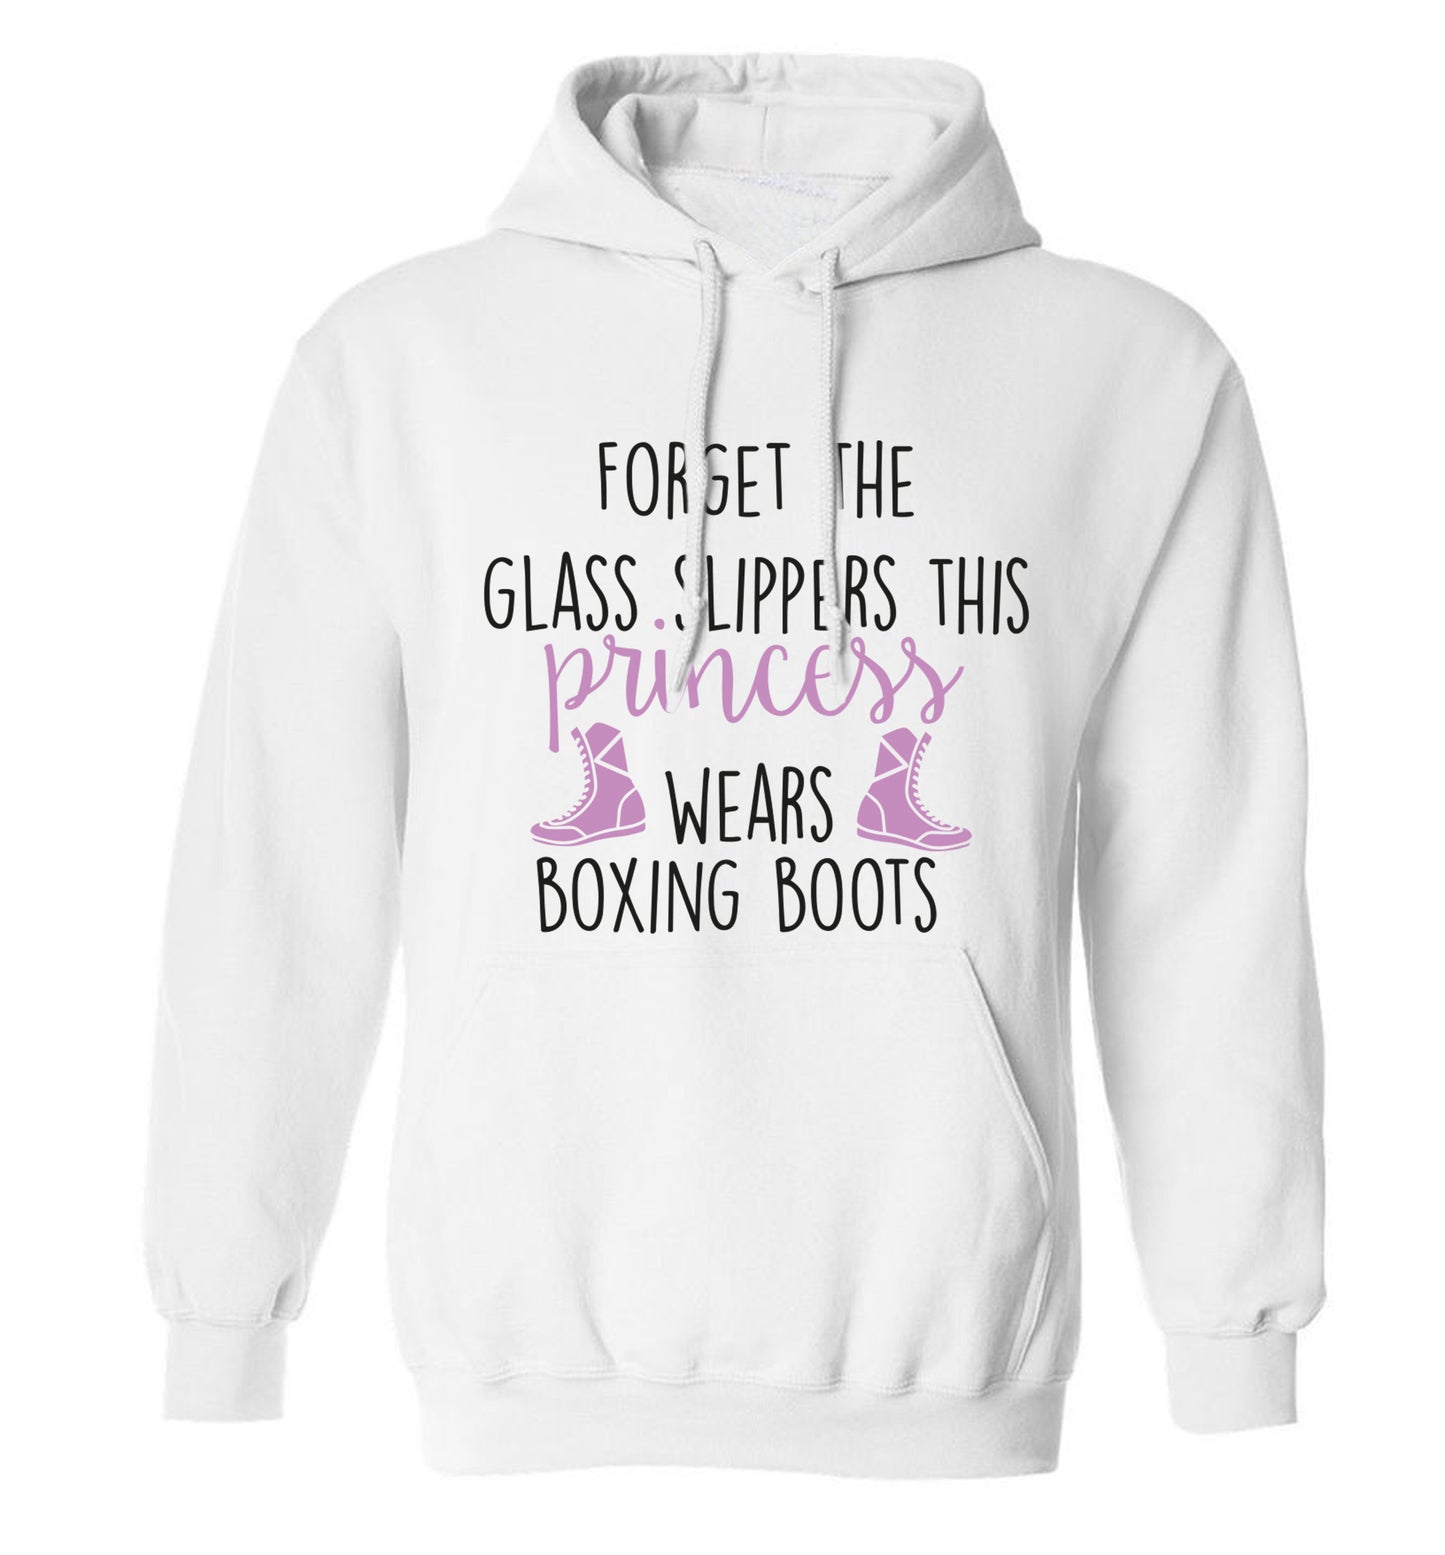 Forget the glass slippers this princess wears boxing boots adults unisex white hoodie 2XL